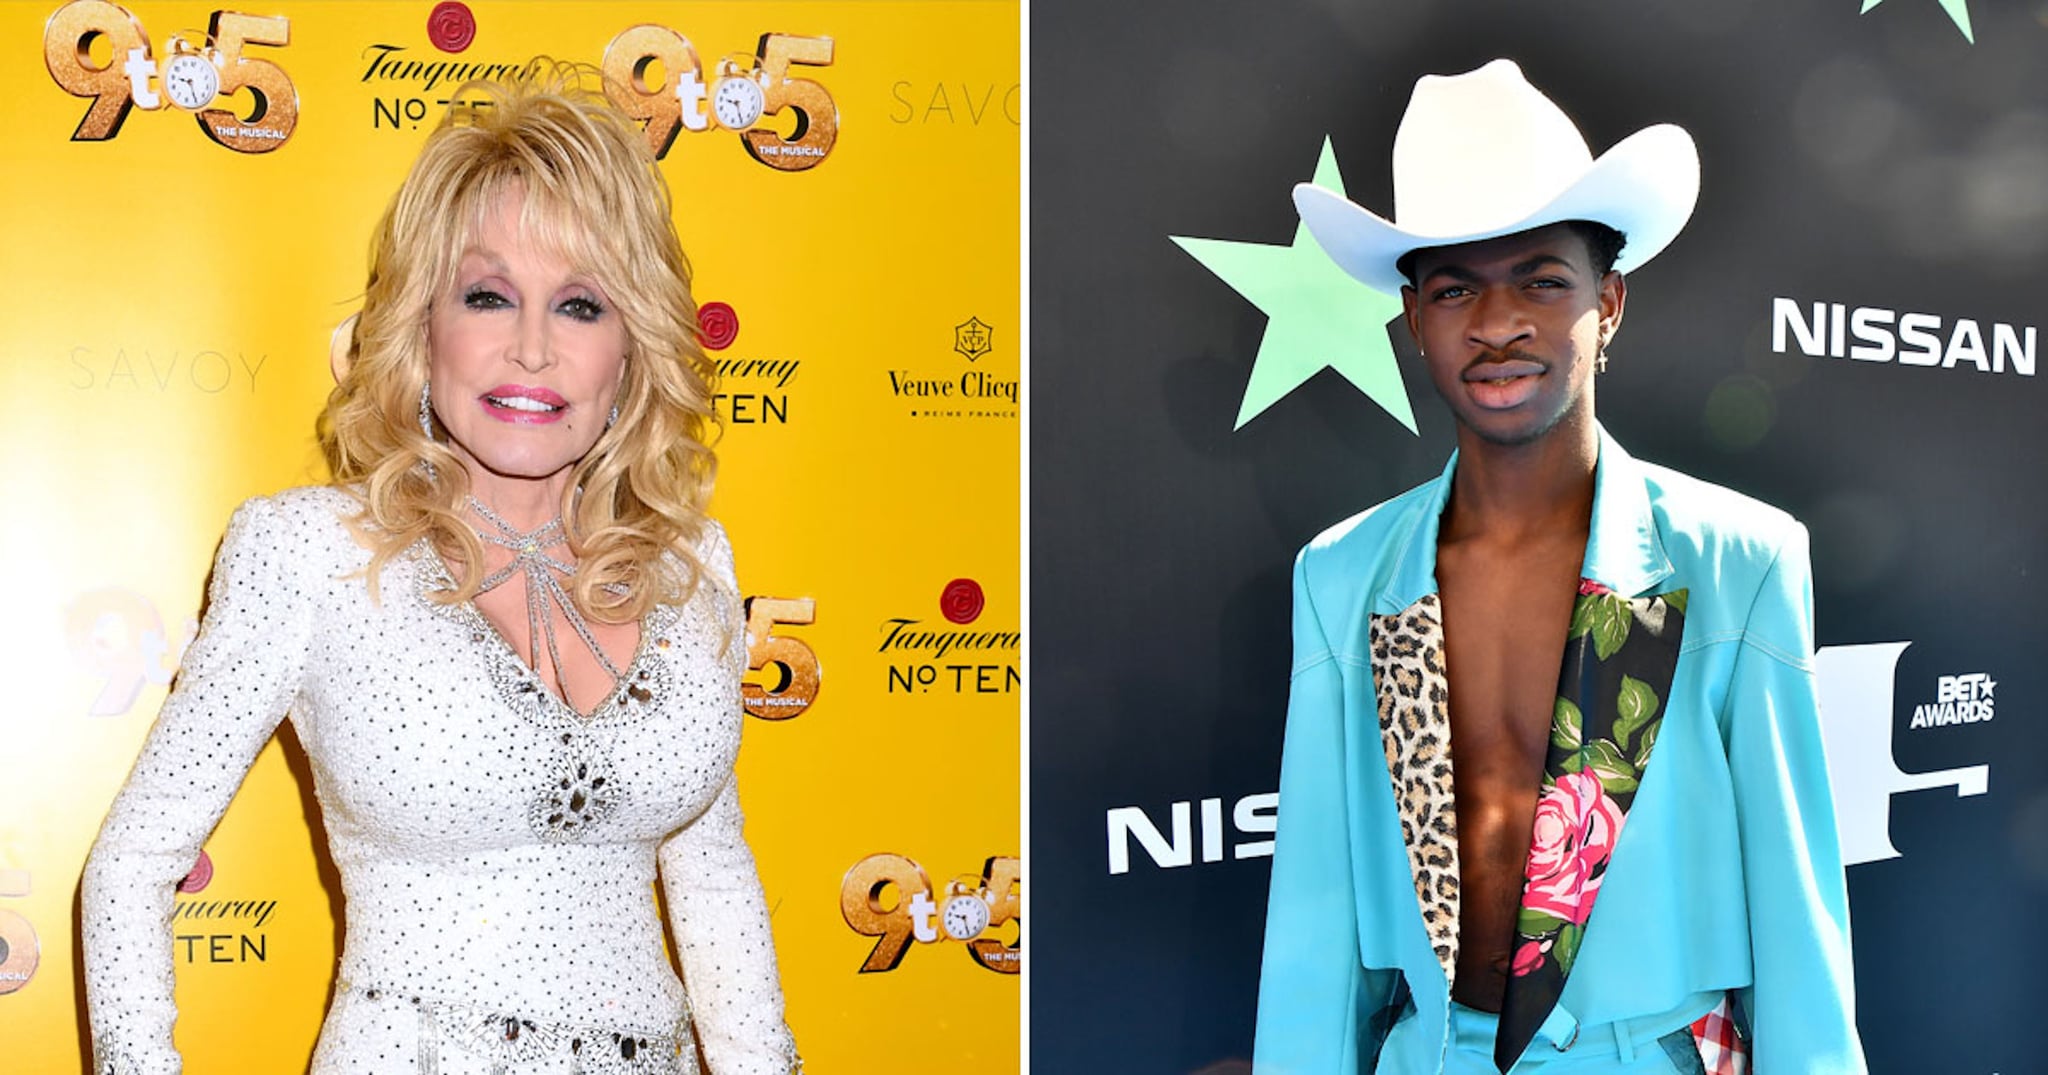 Dolly Parton Responds To Lil Nas X On Old Town Road Remix Popsugar Entertainment Uk - old town road remix roblox id billy ray cyrus